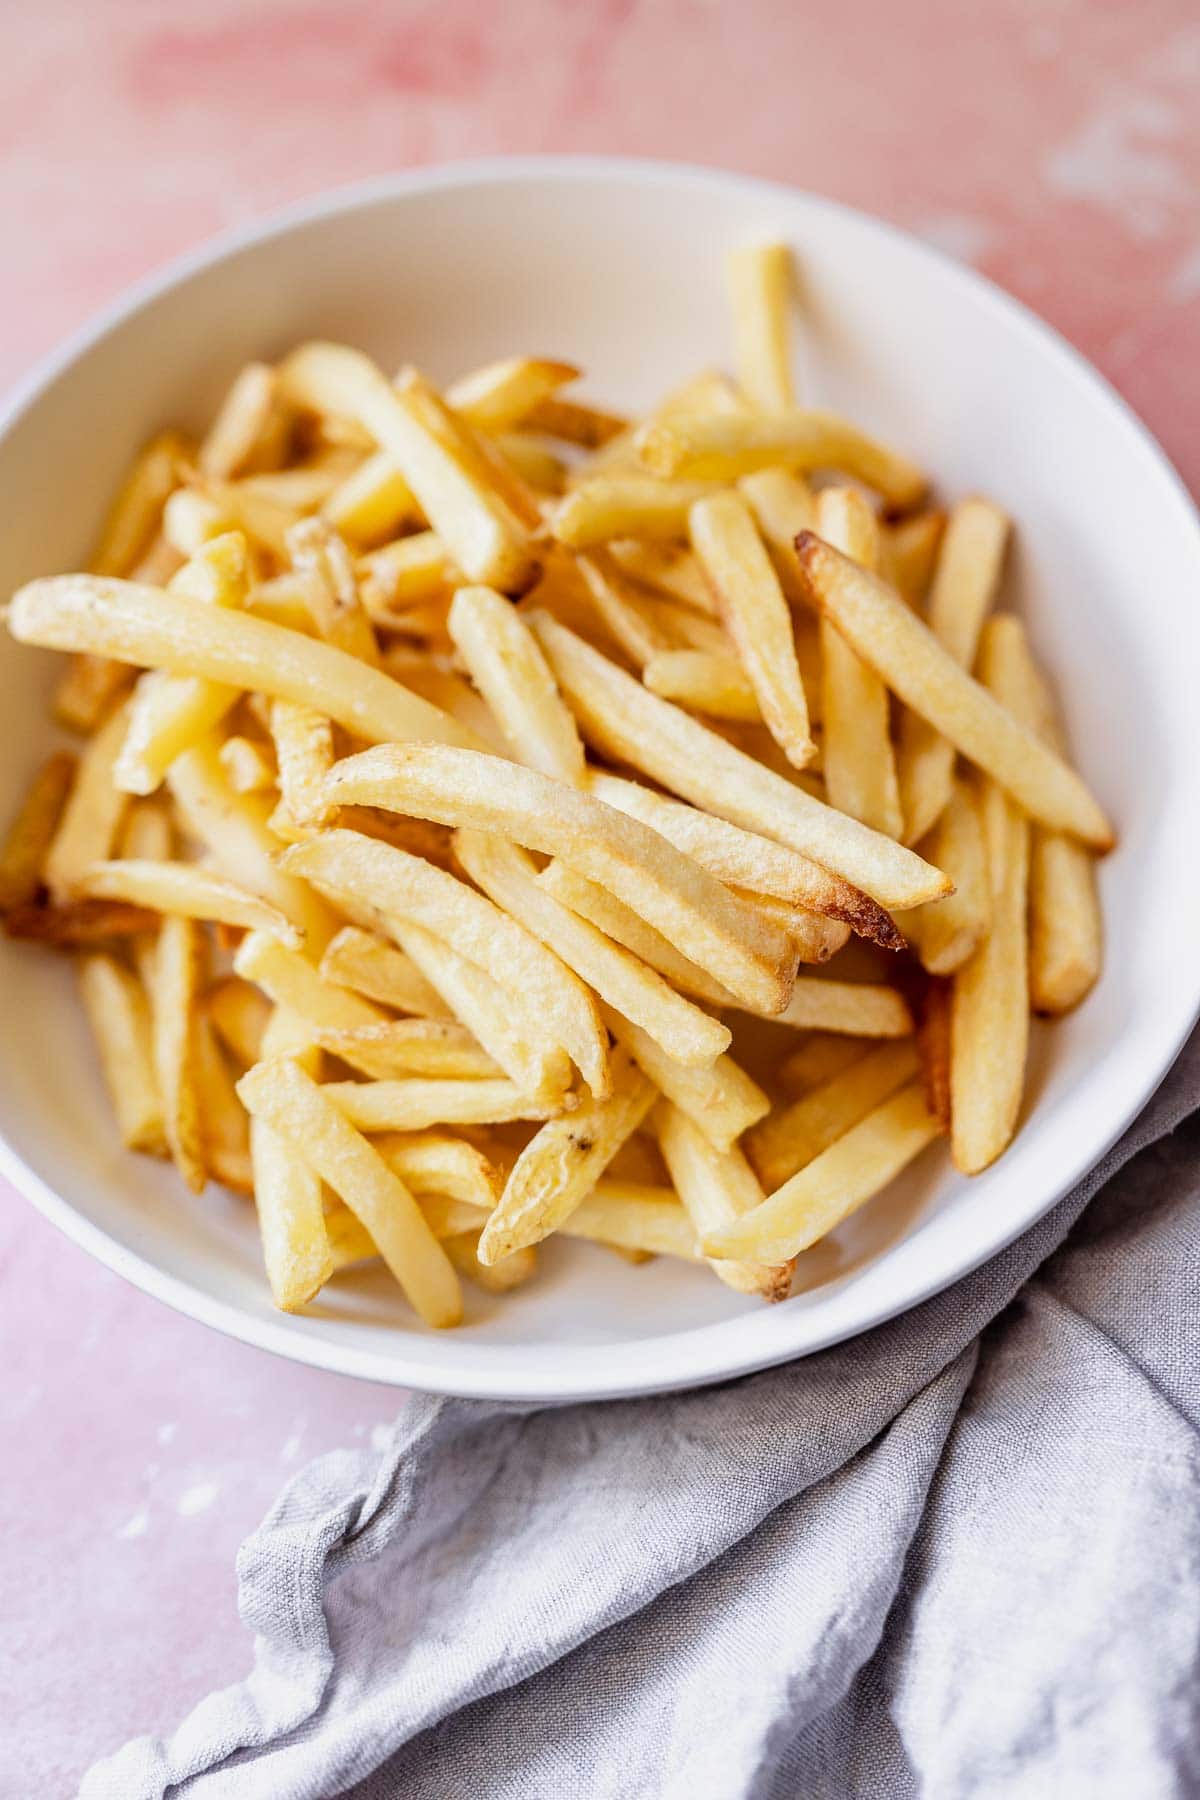 Bowl of crispy golden air fryer french fries on a light background.